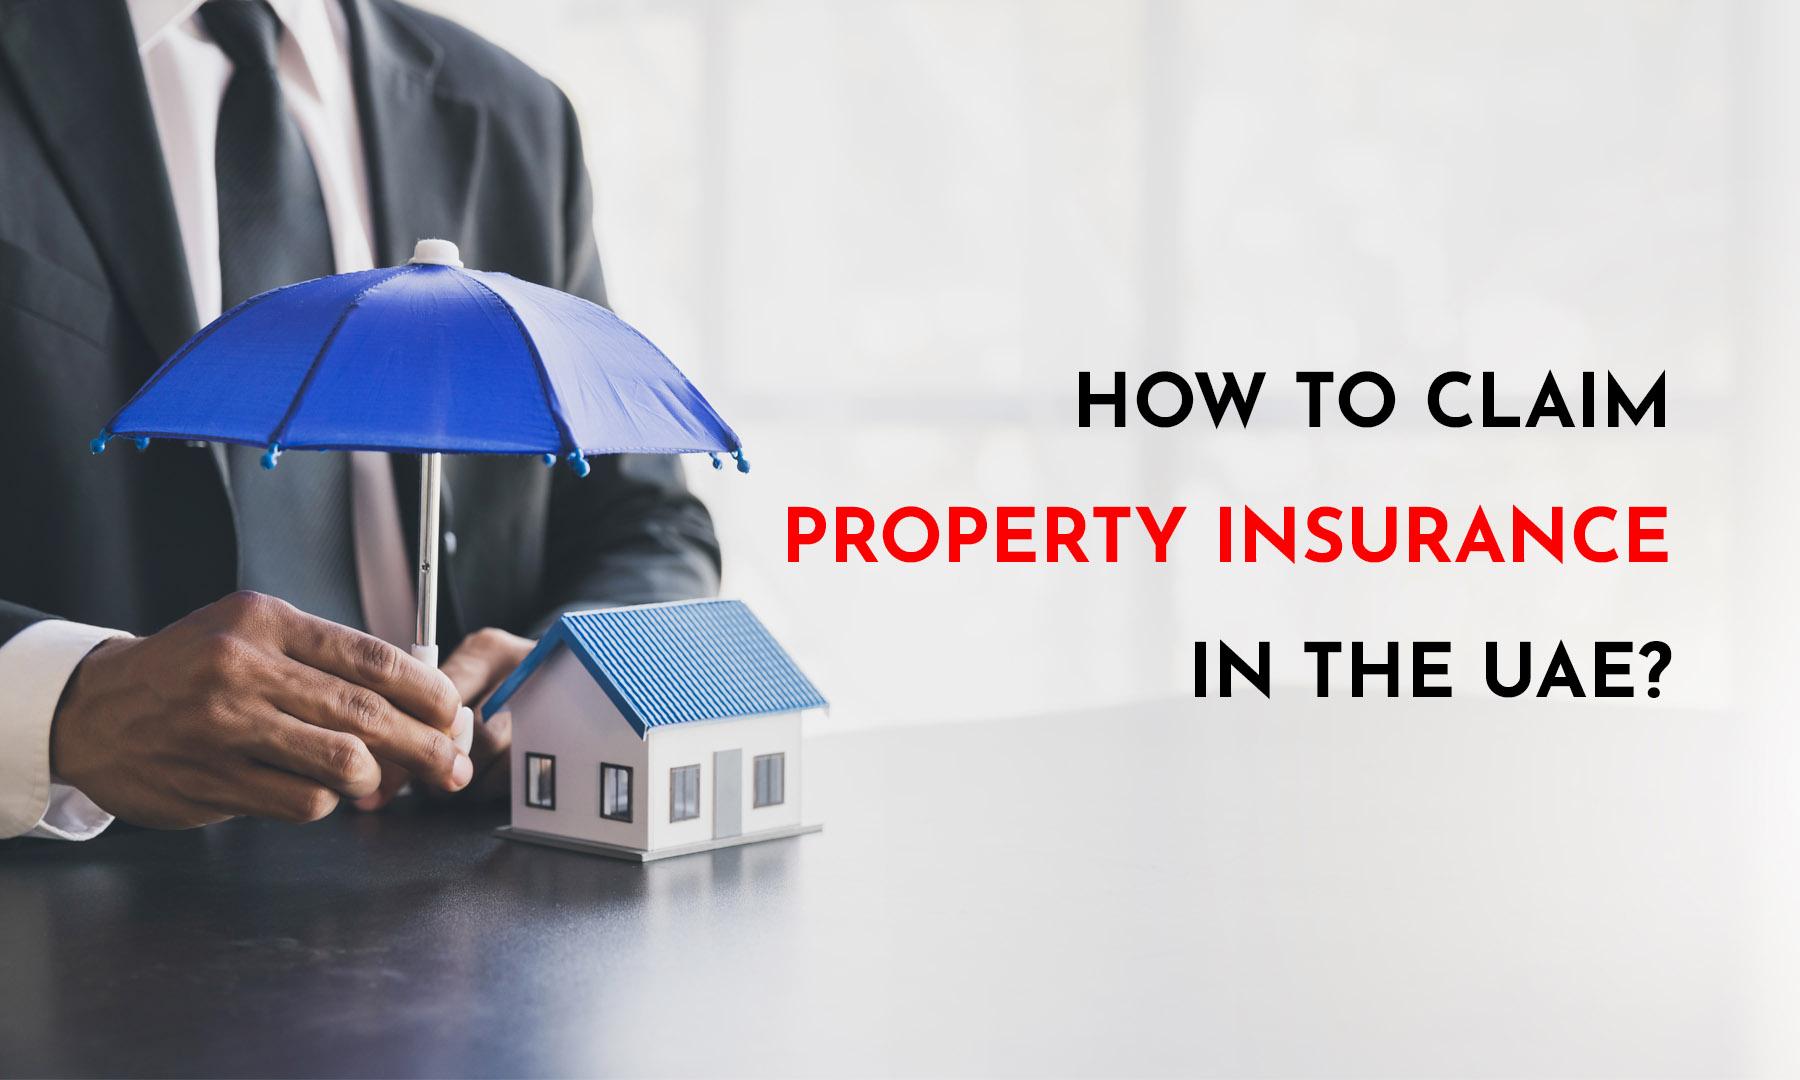 HOW TO CLAIM PROPERTY INSURANCE IN THE UAE?